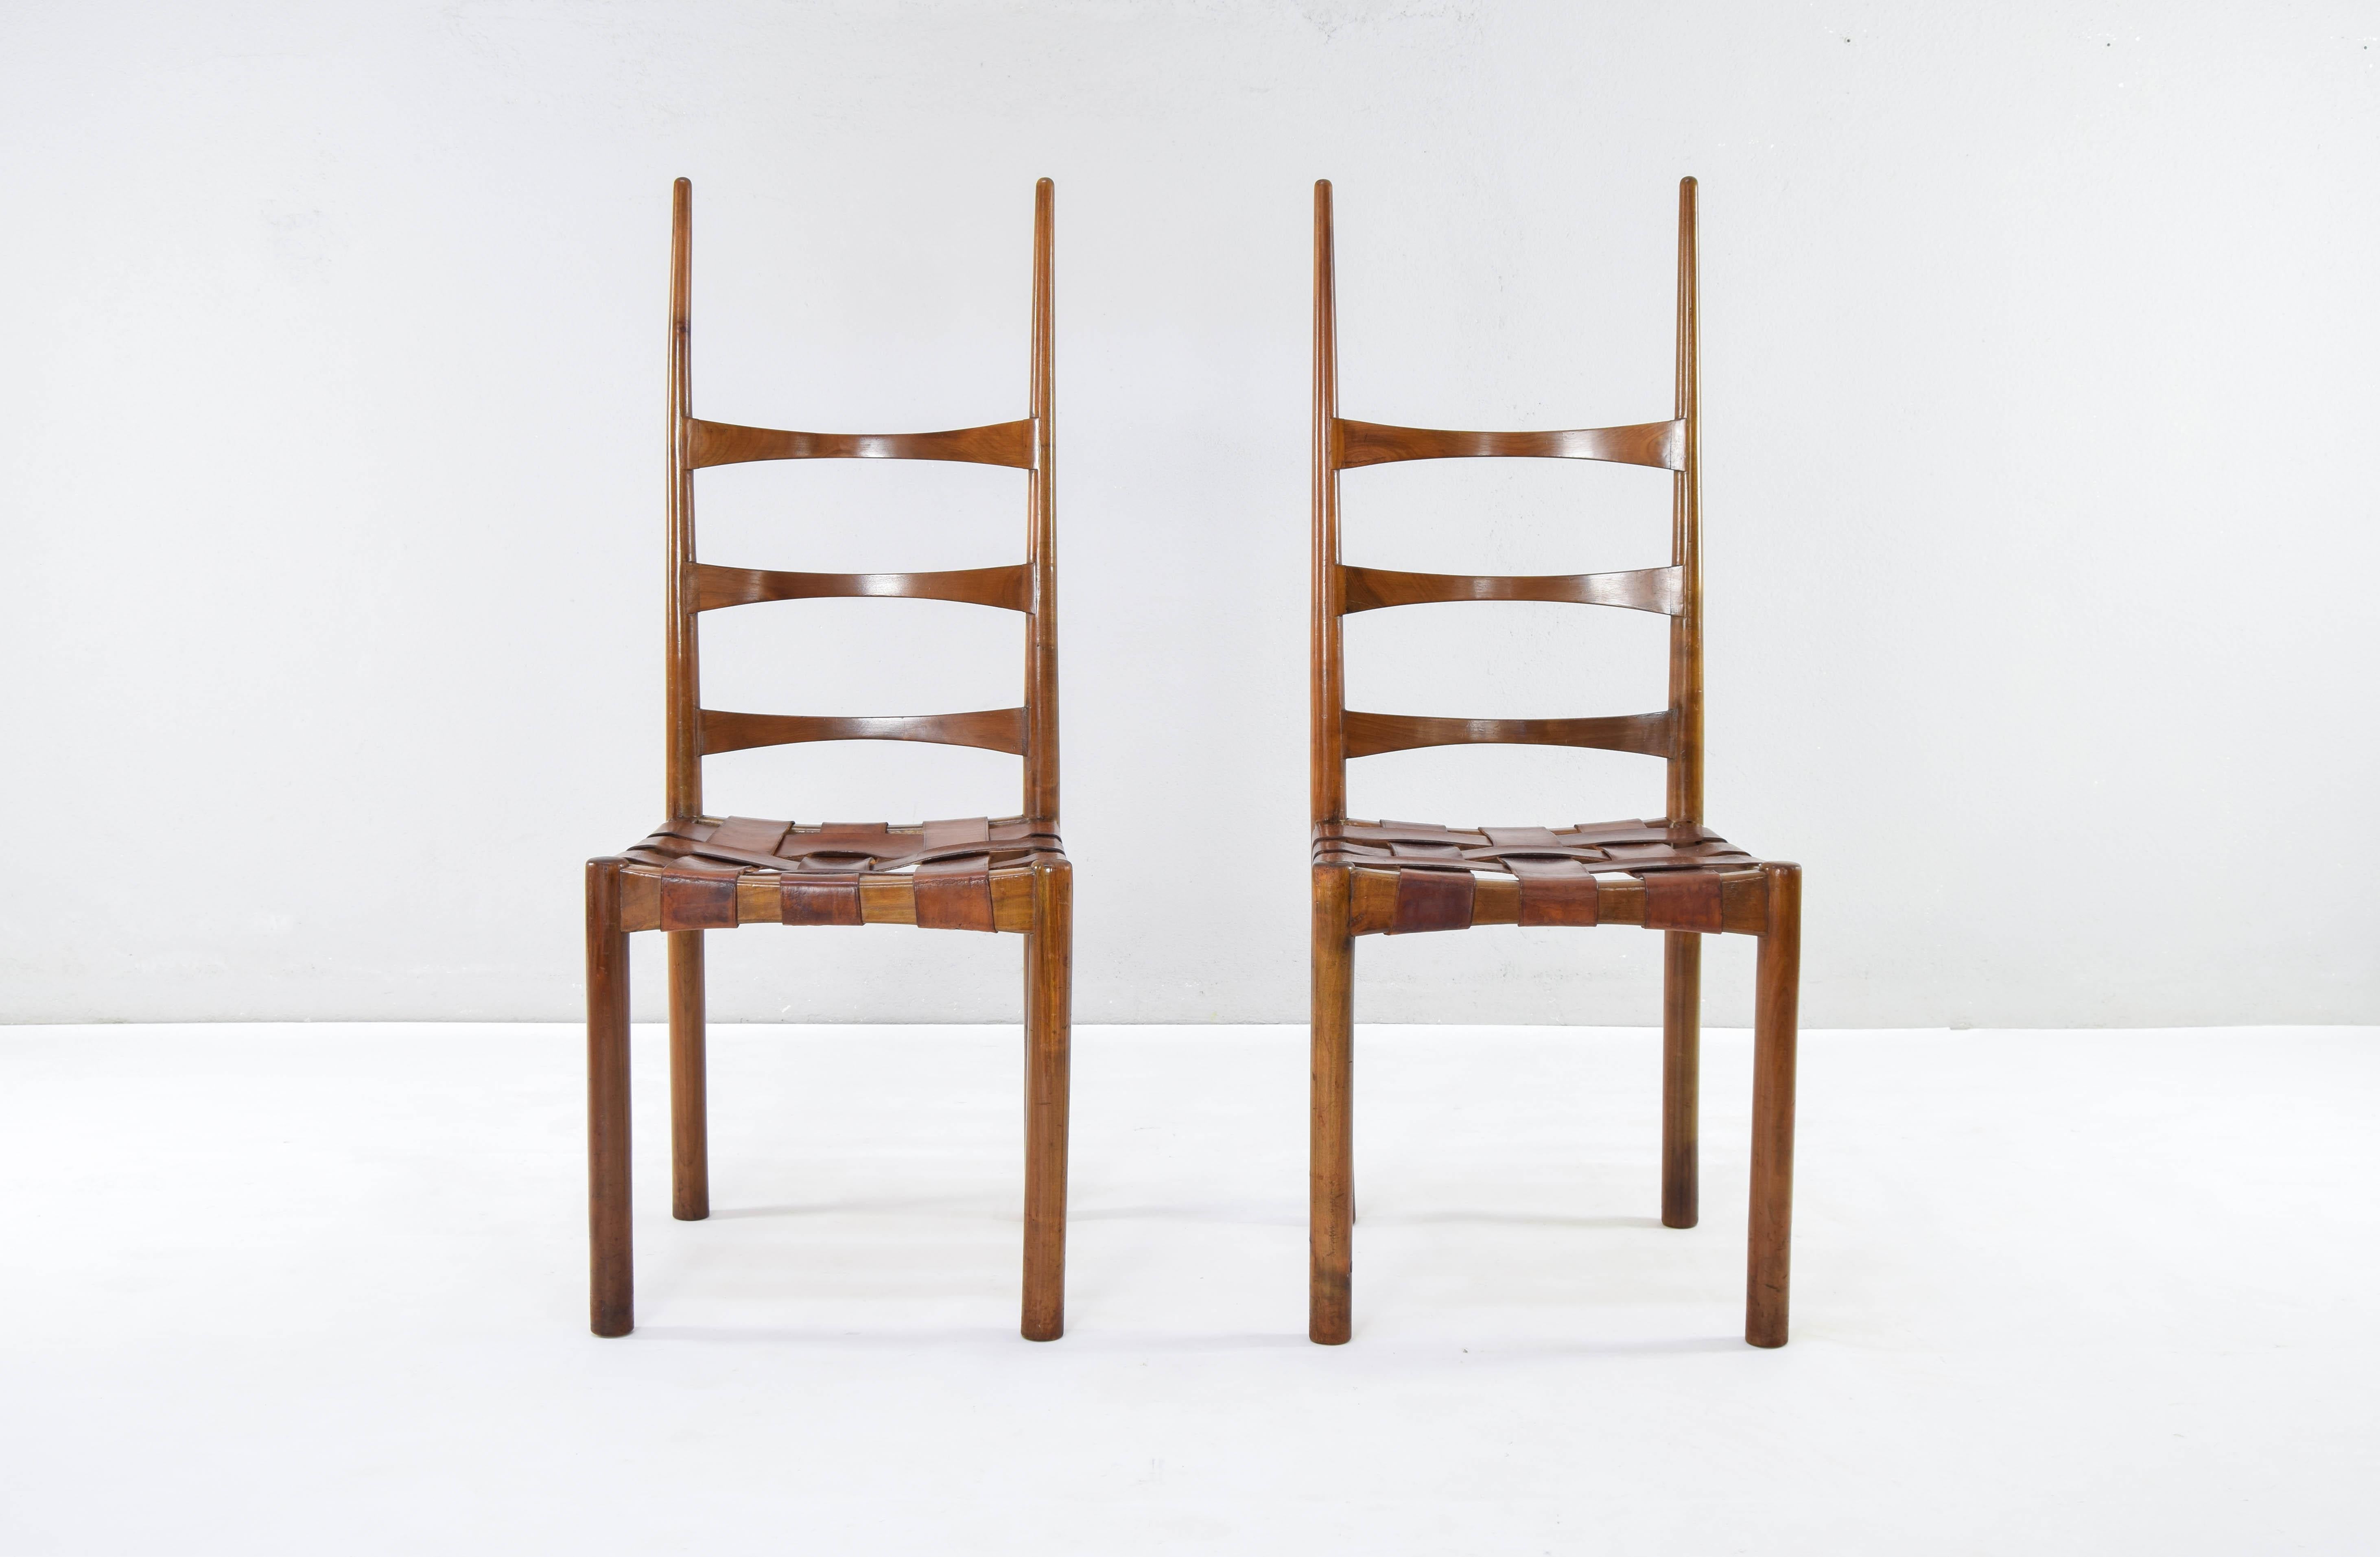 Exceptional pair of Billar chairs.

Model that reflects the modern Mediterranean style like no other.

Antique edition of a Billar chair made of ash wood and with a seat made up of six intertwined leather bands (as in the designer's Tiracord